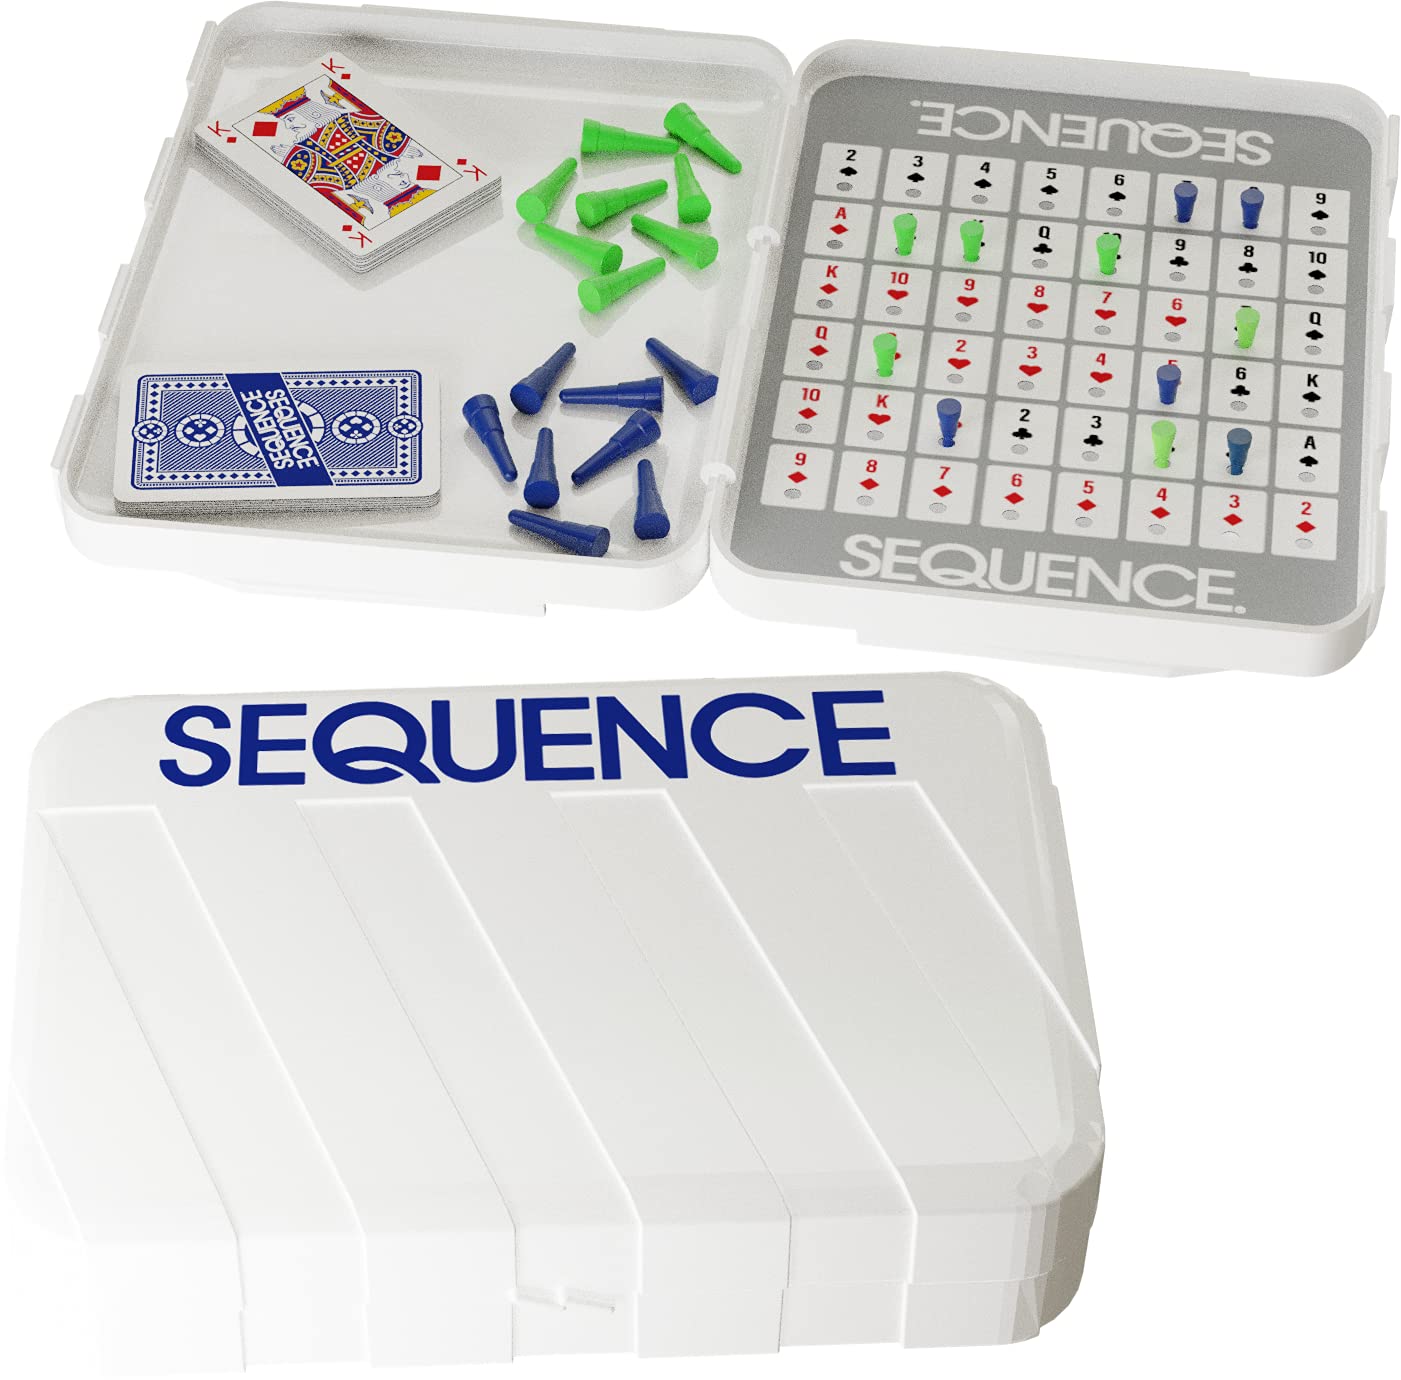 Travel Classics: Sequence - The Exciting Game of Strategy in A Compact Travel Version by Goliath, White